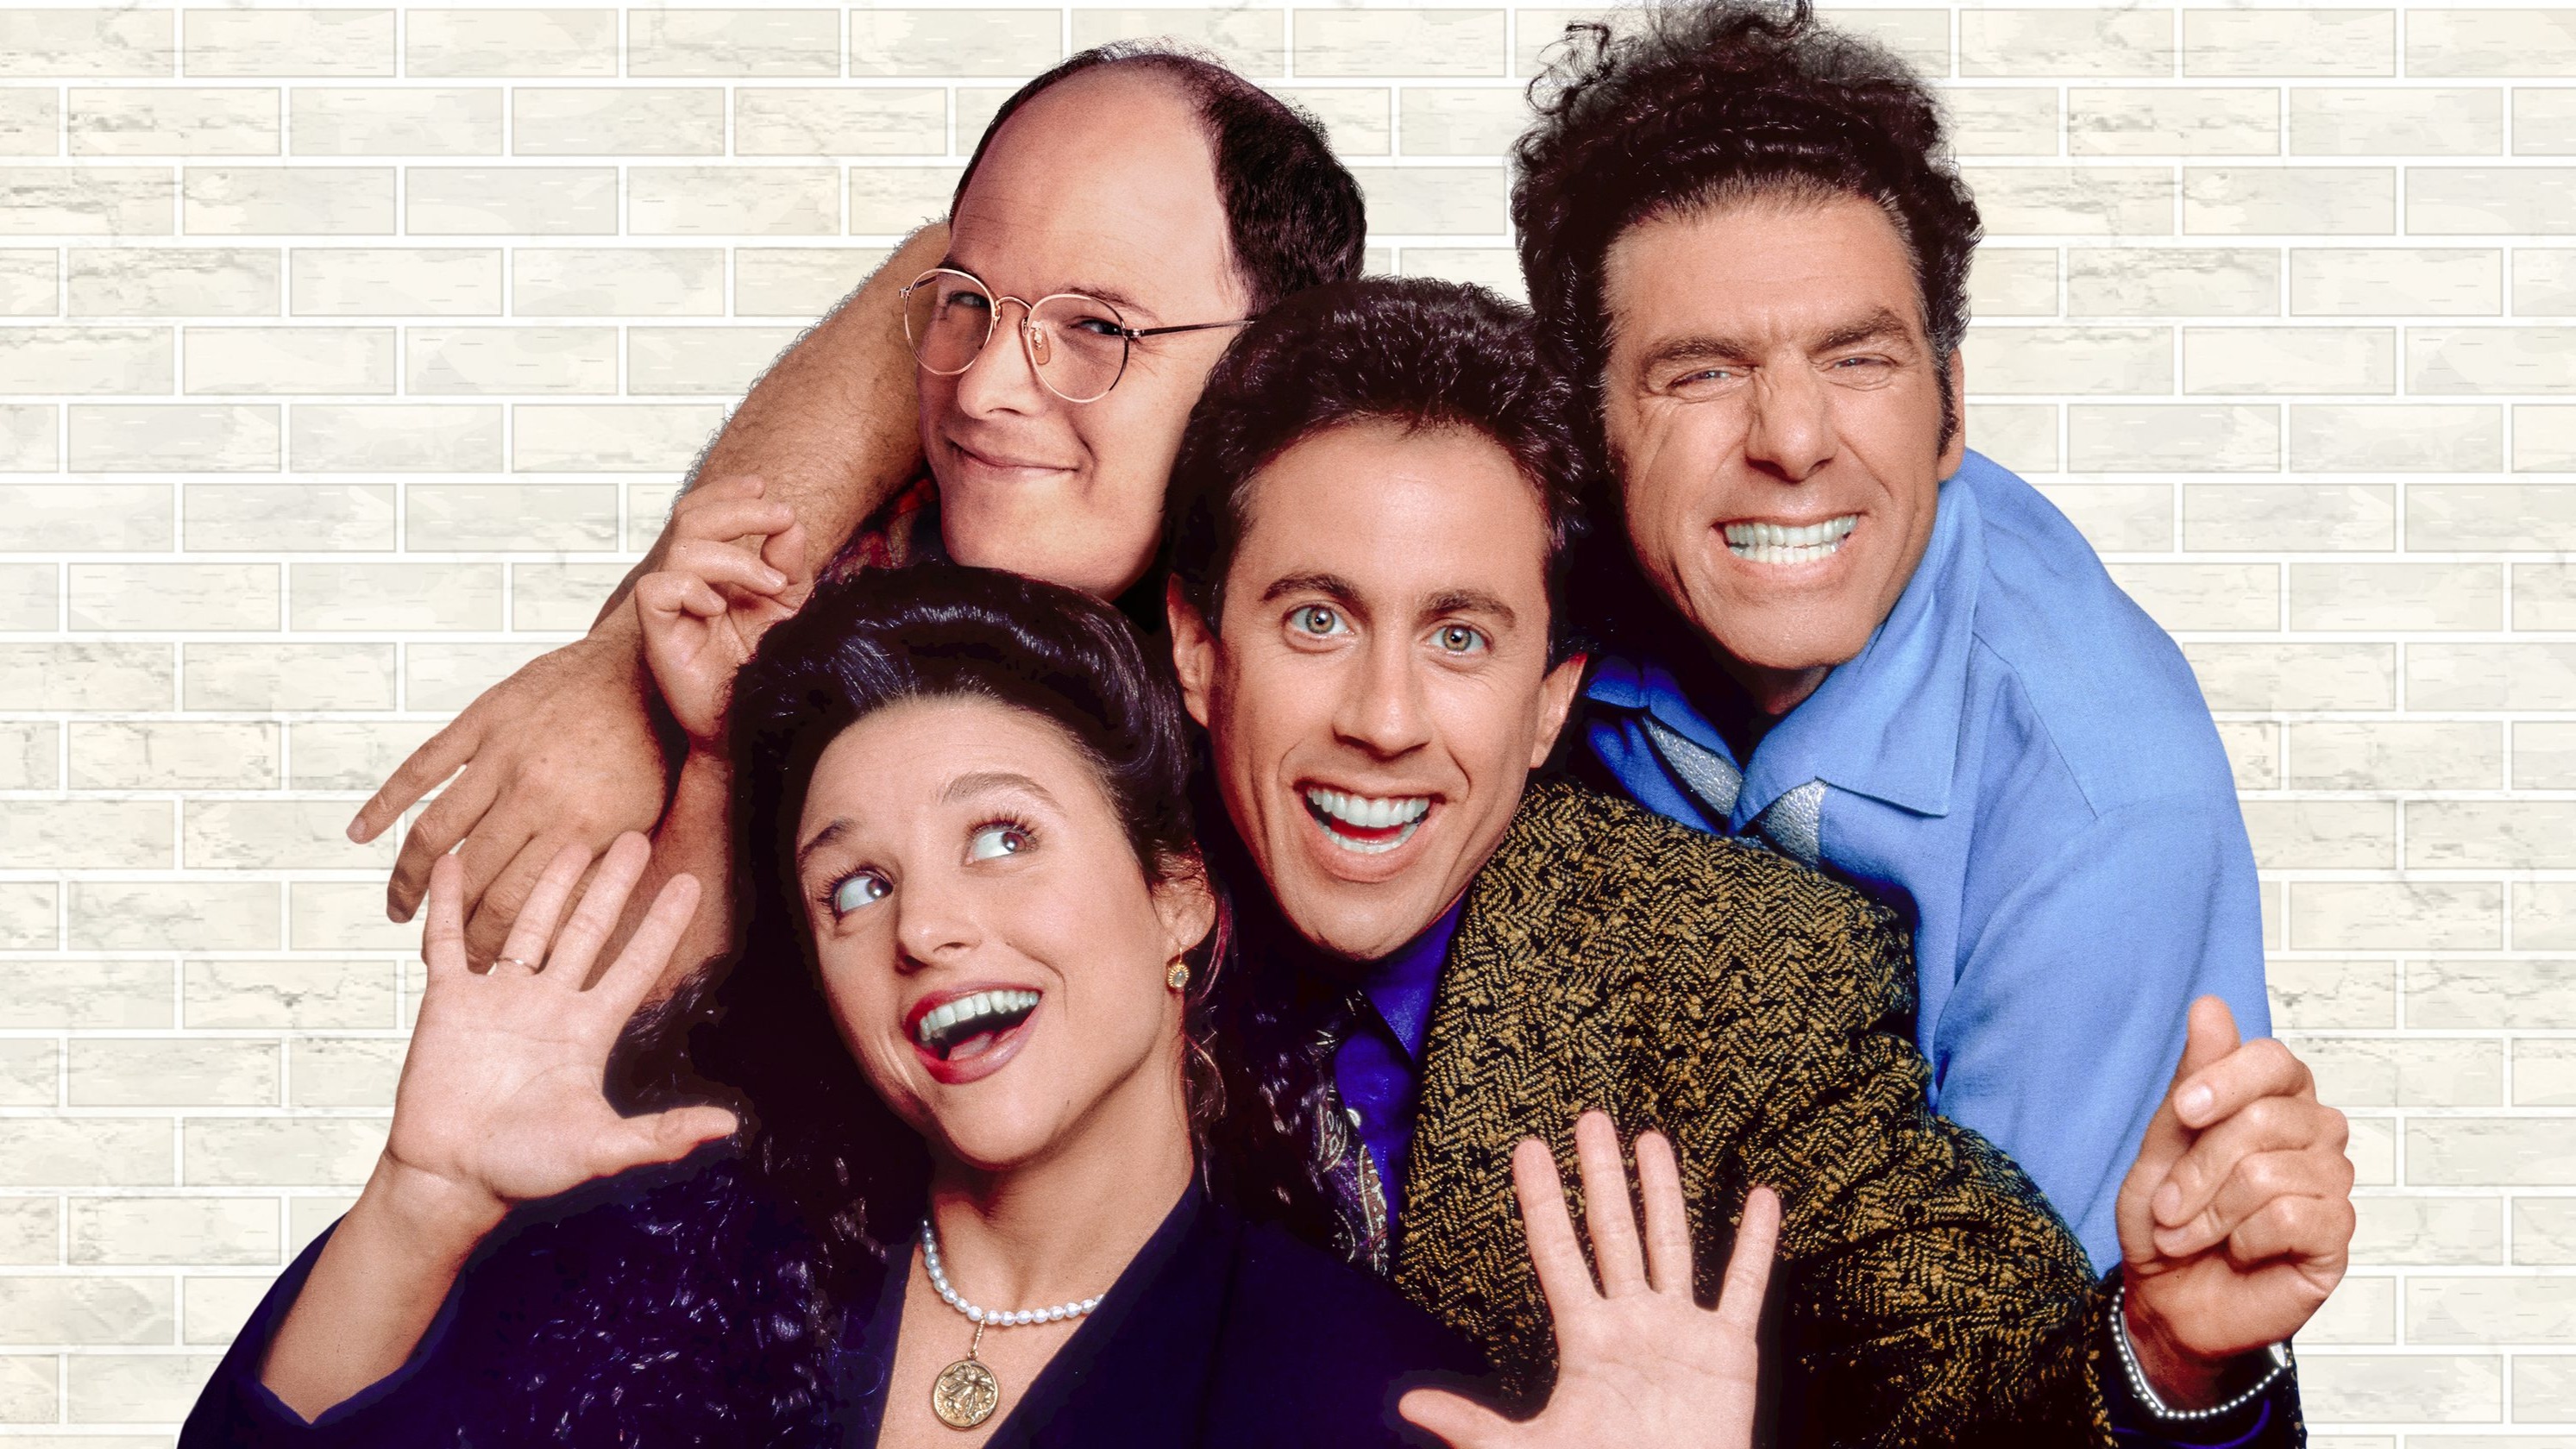 RE: What is the best episode of Seinfeld?